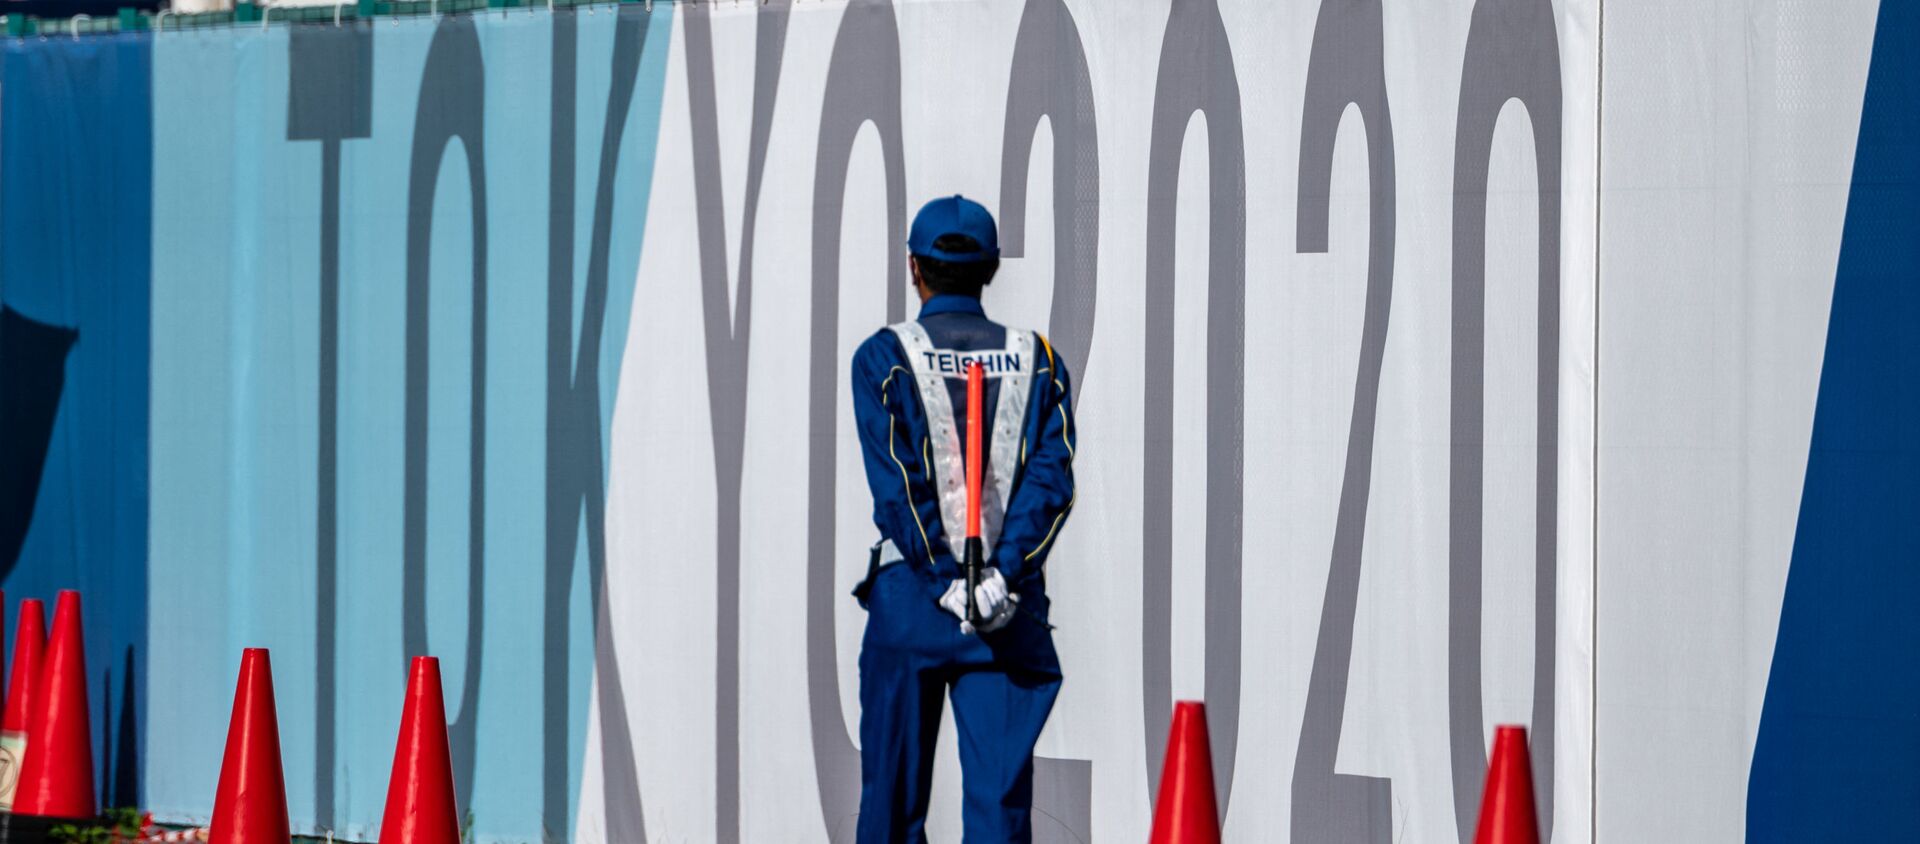 A security guard walks at the Olympic and Paralympic Village in Tokyo on July 15, 2021, ahead of the 2020 Tokyo Olympic Games which begins on July 23. - Sputnik International, 1920, 17.07.2021